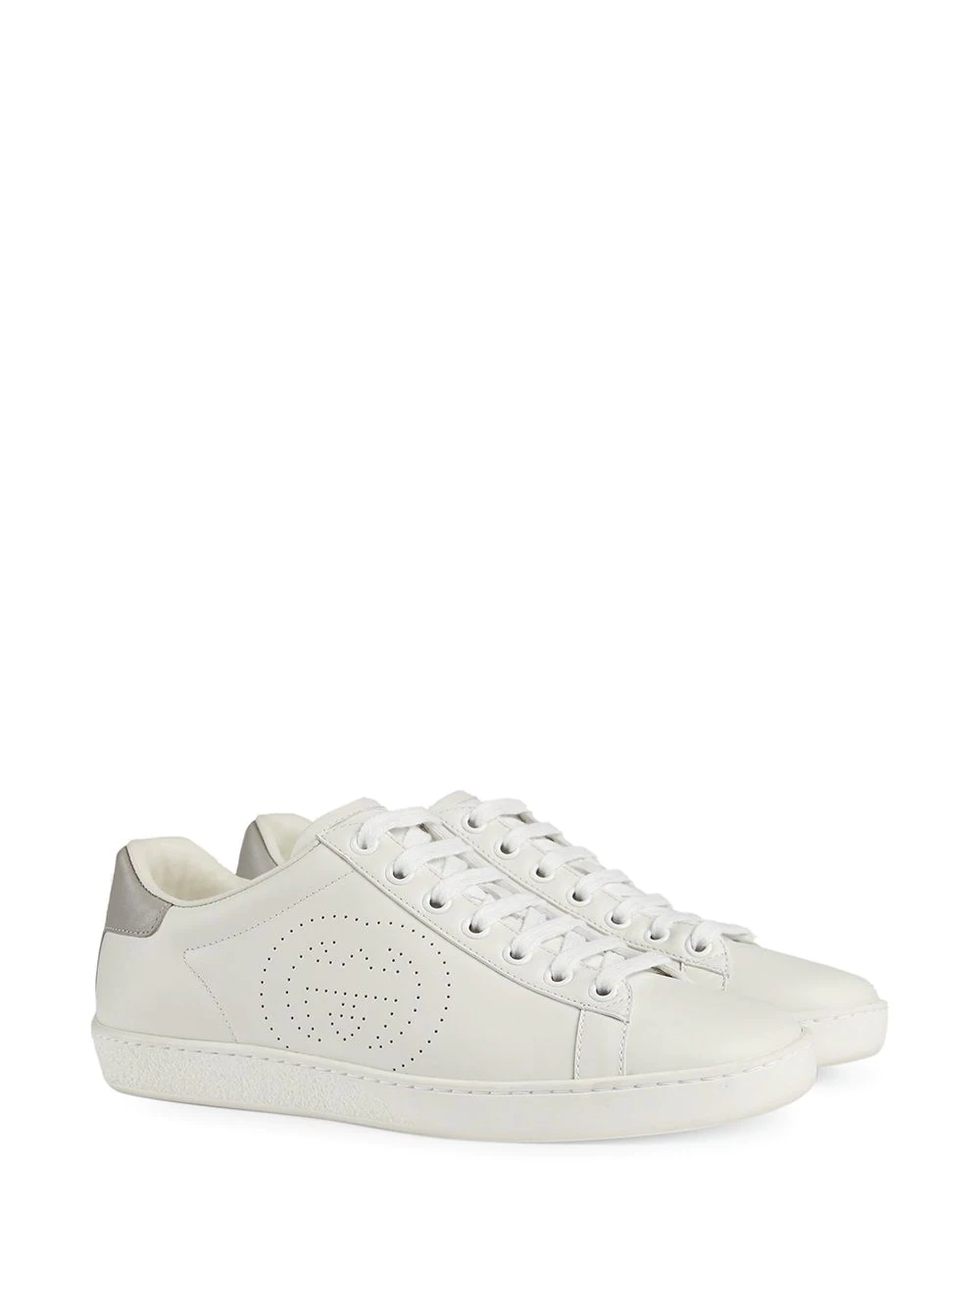 gucci ace lowtop sneakers